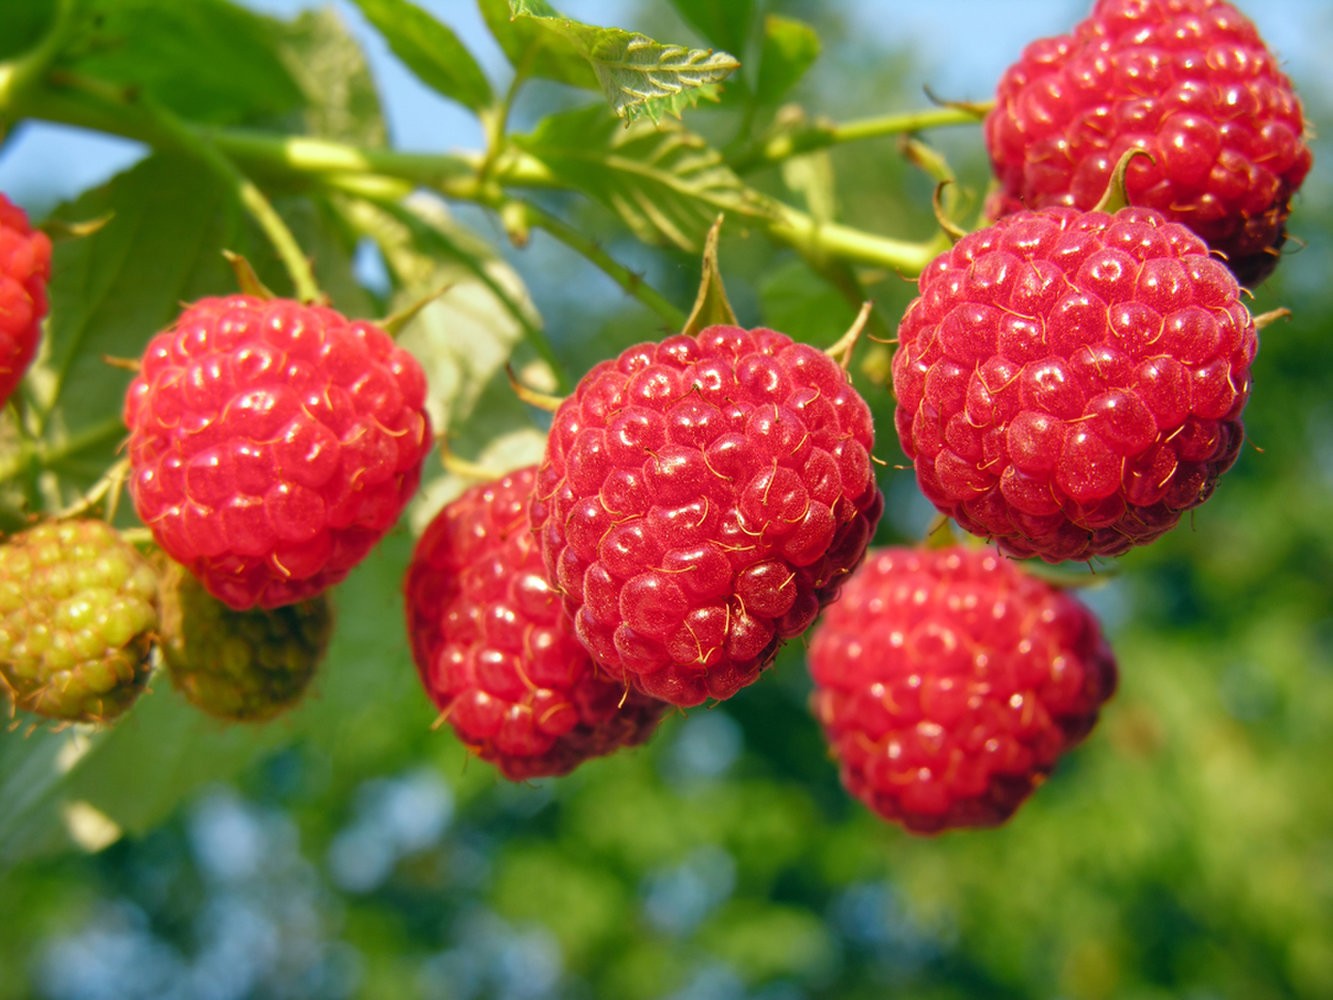 This fruit of raspberry will give you benefit in many of these diseases, now know रसभरी